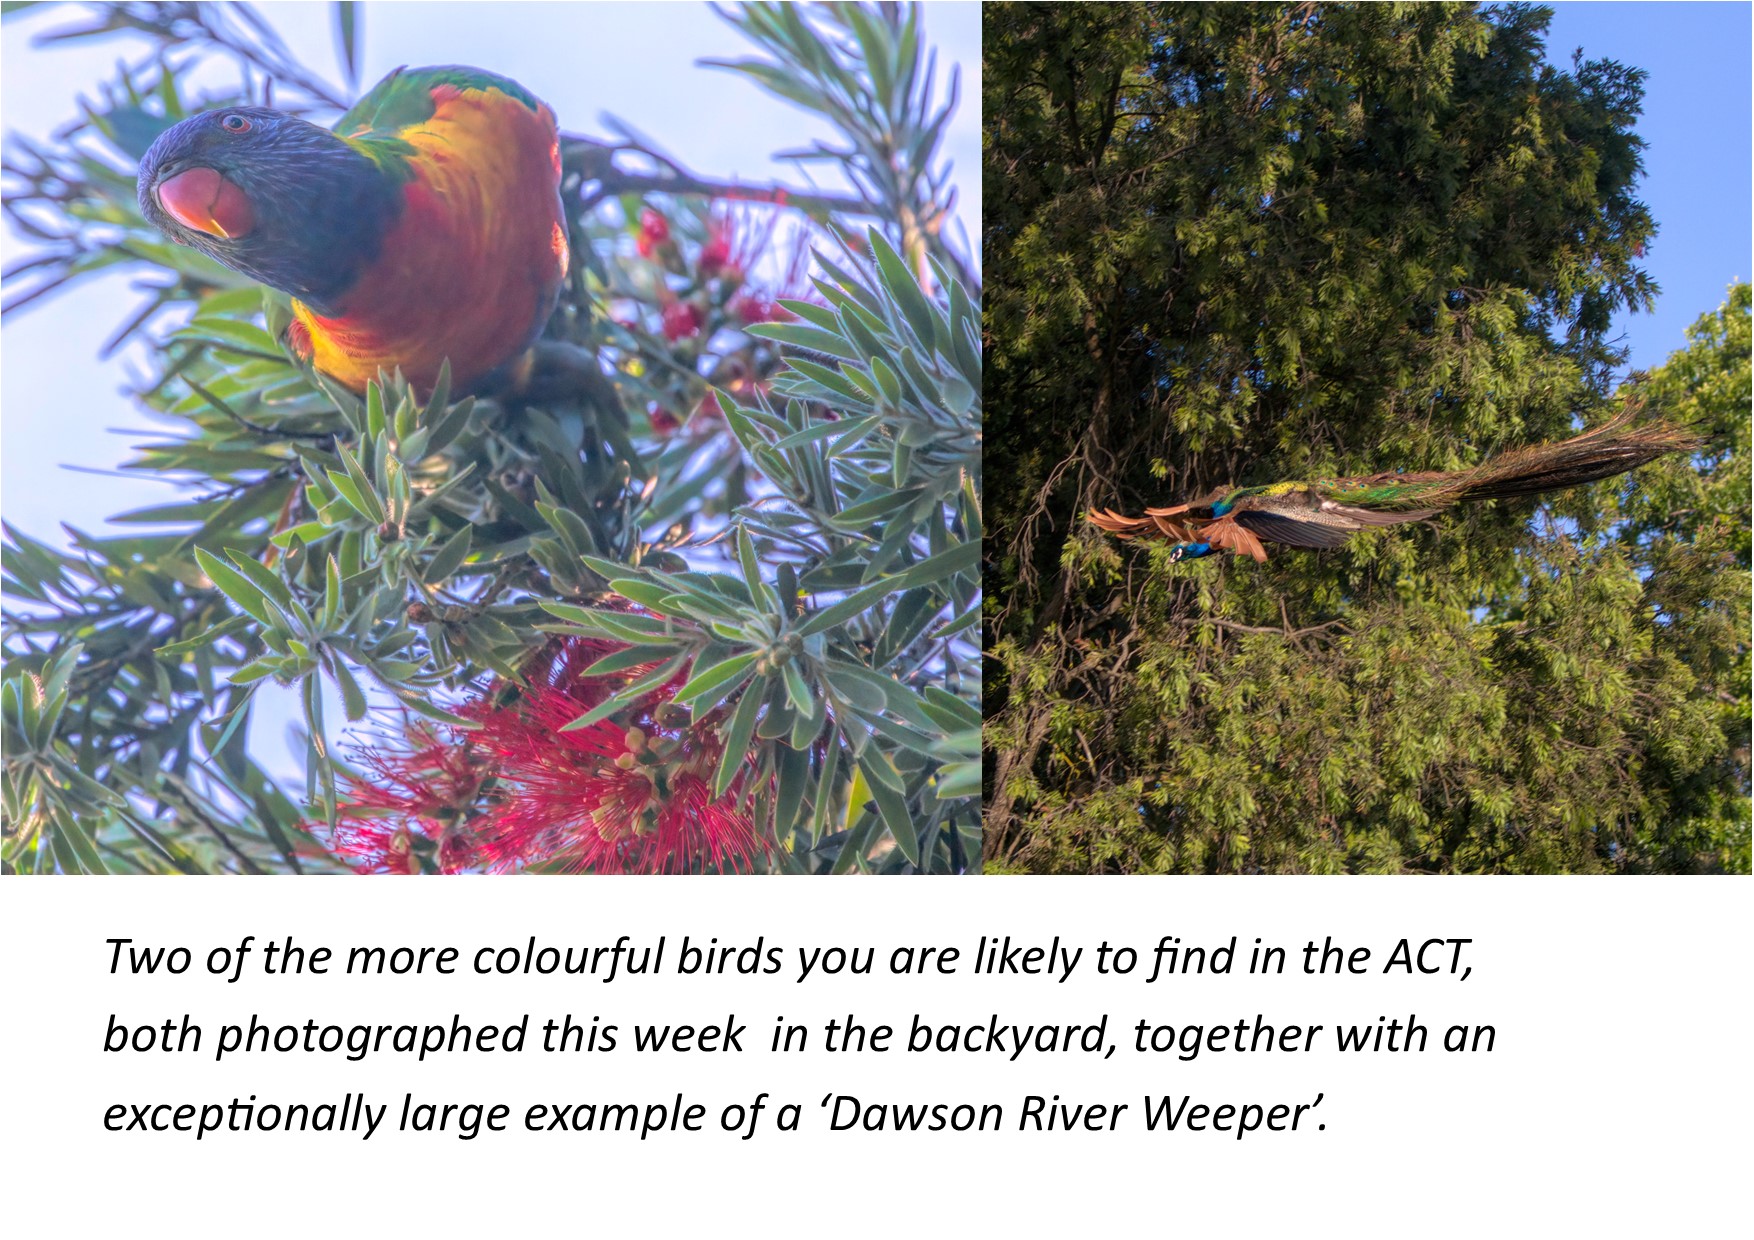 A picture containing text, tree, parrot, bird

Description automatically generated